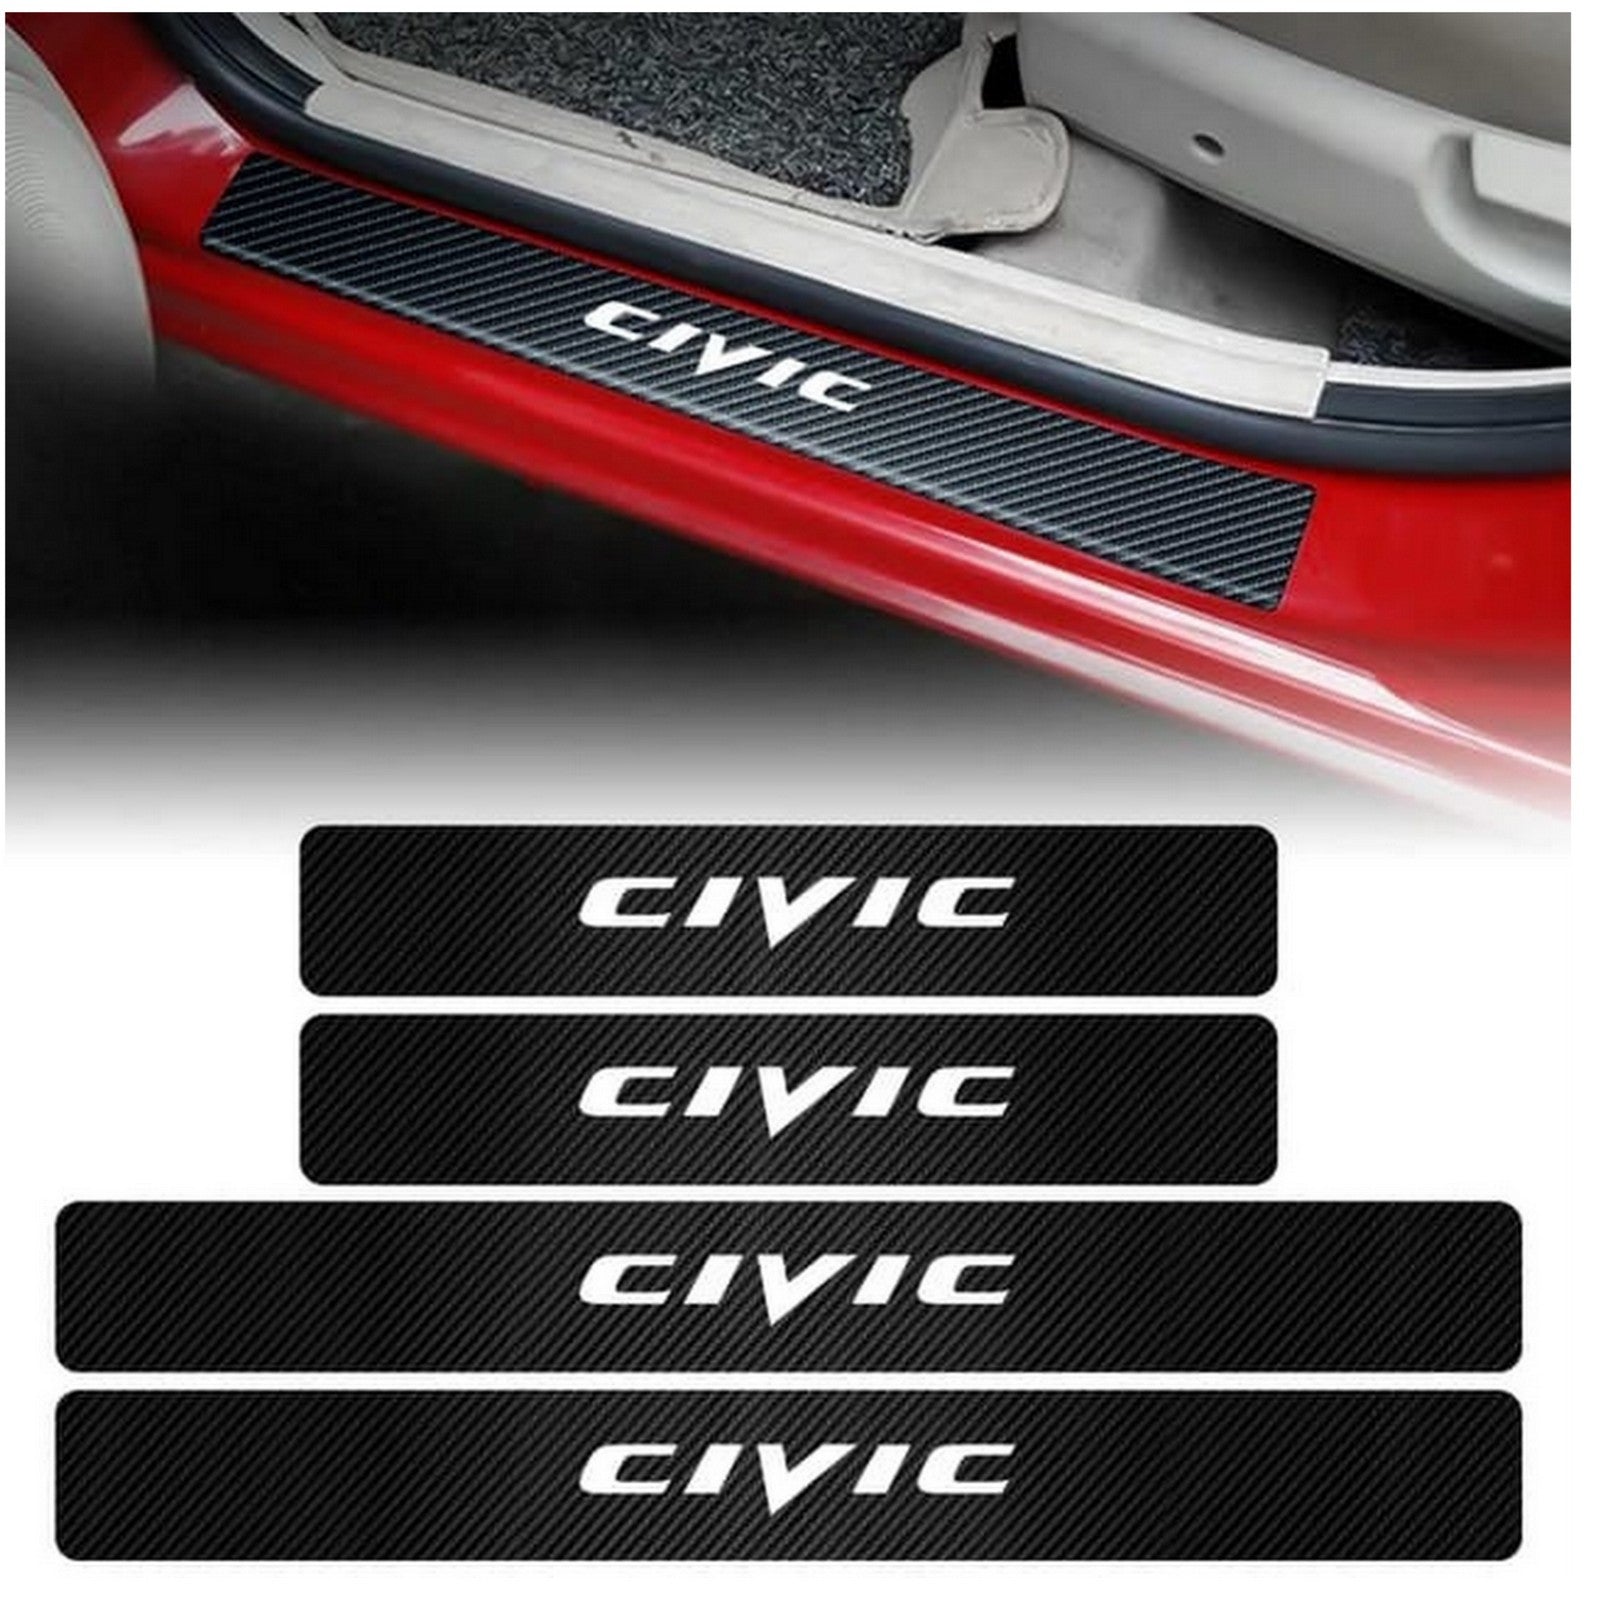 4pcs Compatible with Honda Civic Door Entry Guard Decal Sticker